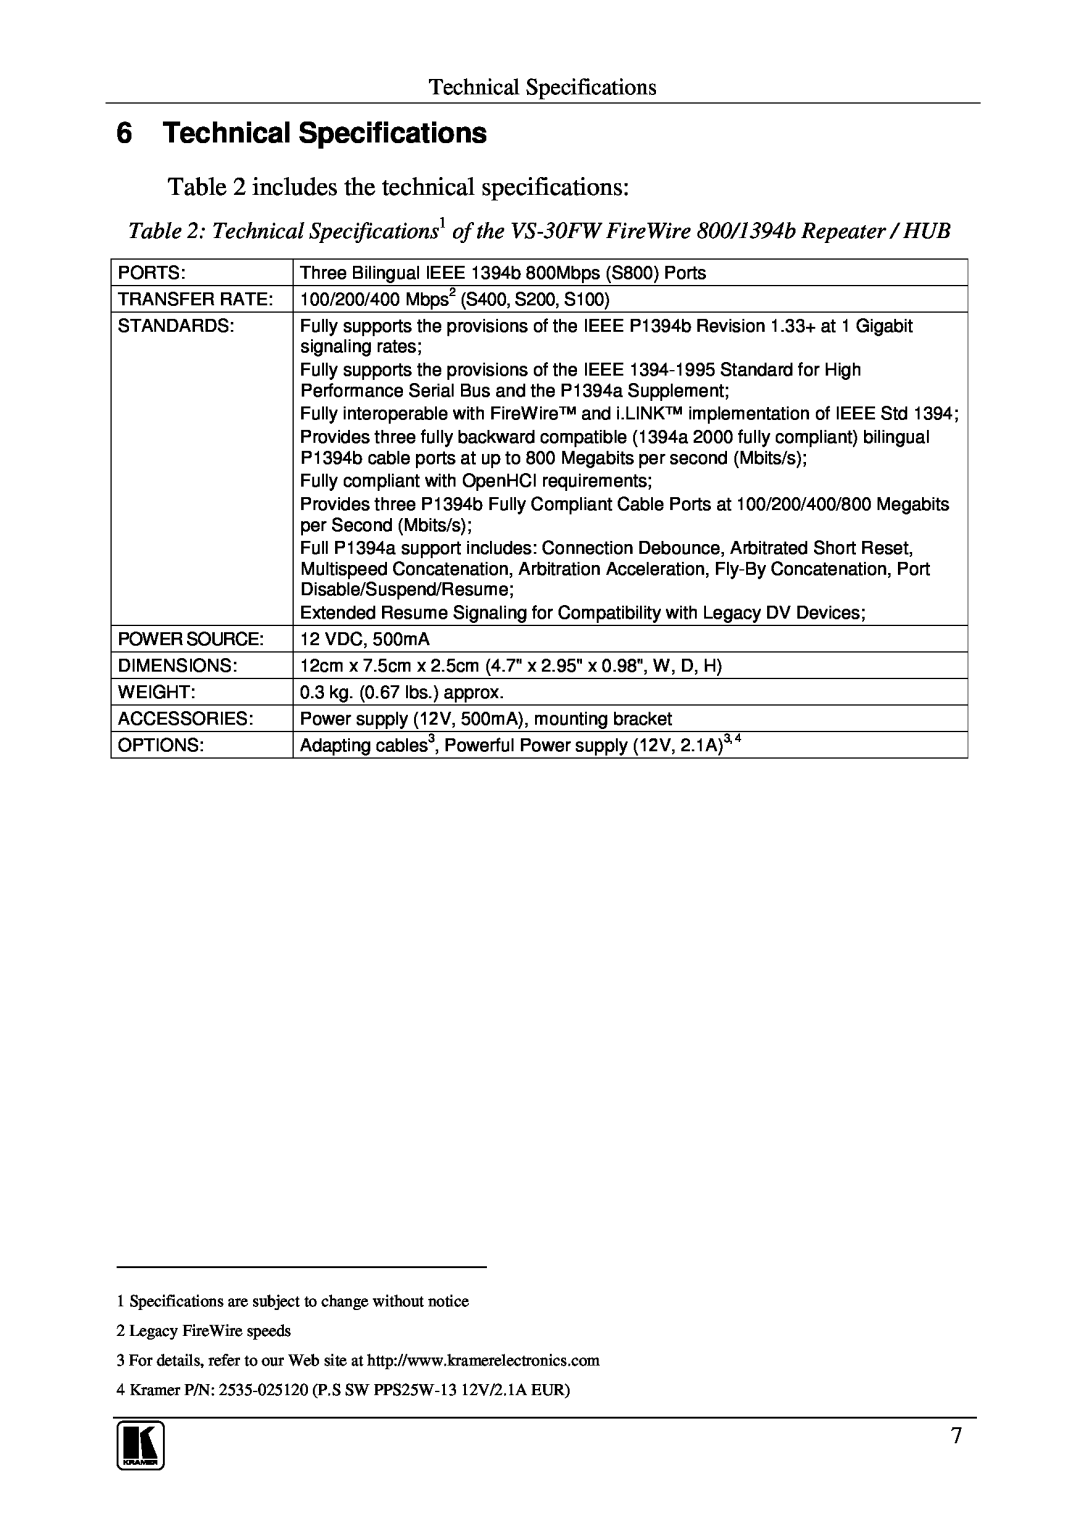 Kramer Electronics VS-30FW user manual Technical Specifications, includes the technical specifications 